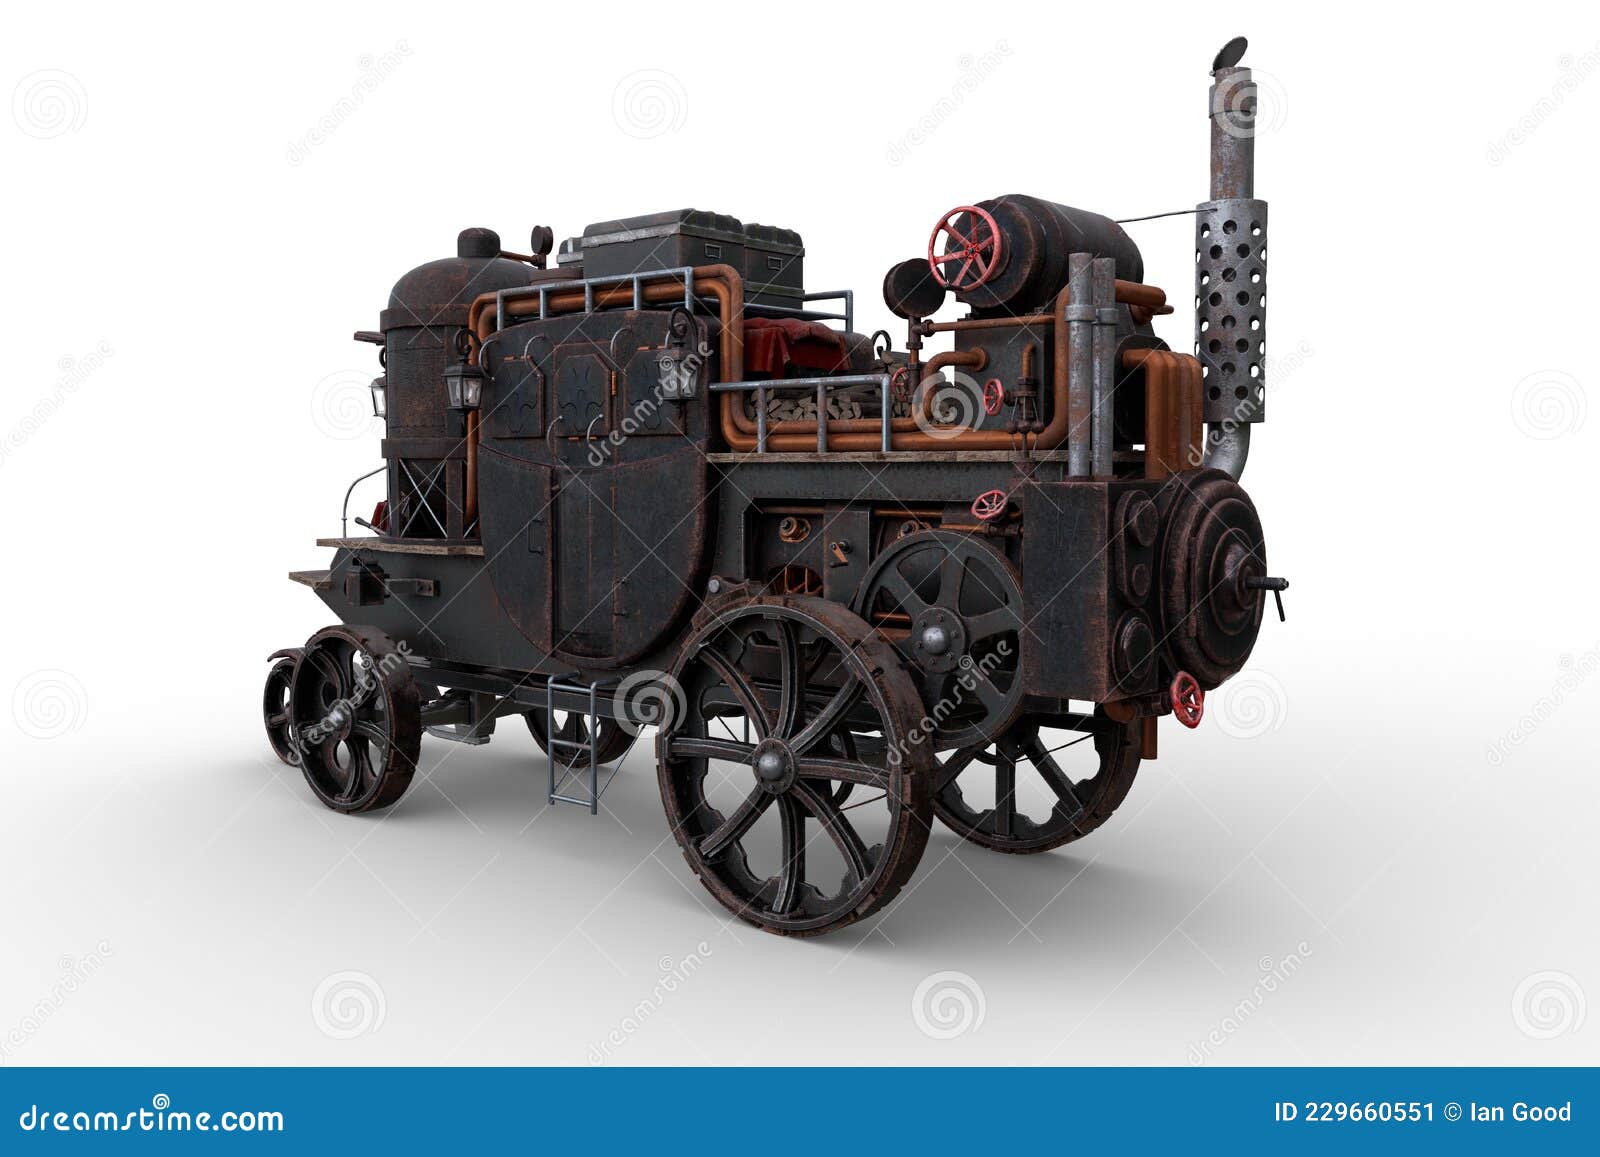 A steam powered vehicle the first vehicle фото 46